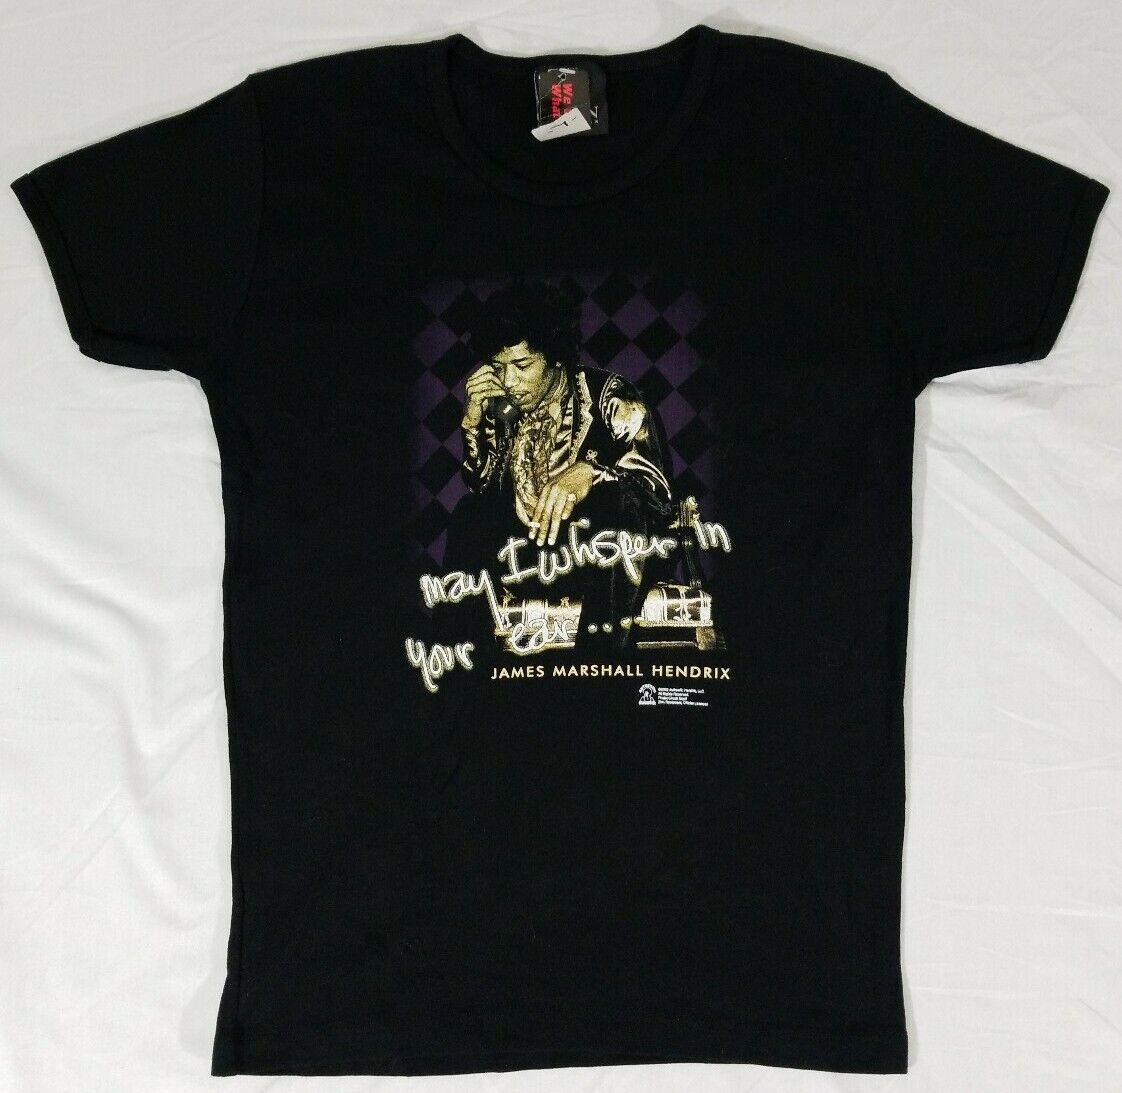 Jimi Hendrix "May I Whisper in Your Ear" Zion Rootswear Womens Top T-Shirt L NWT Zion Rootswear